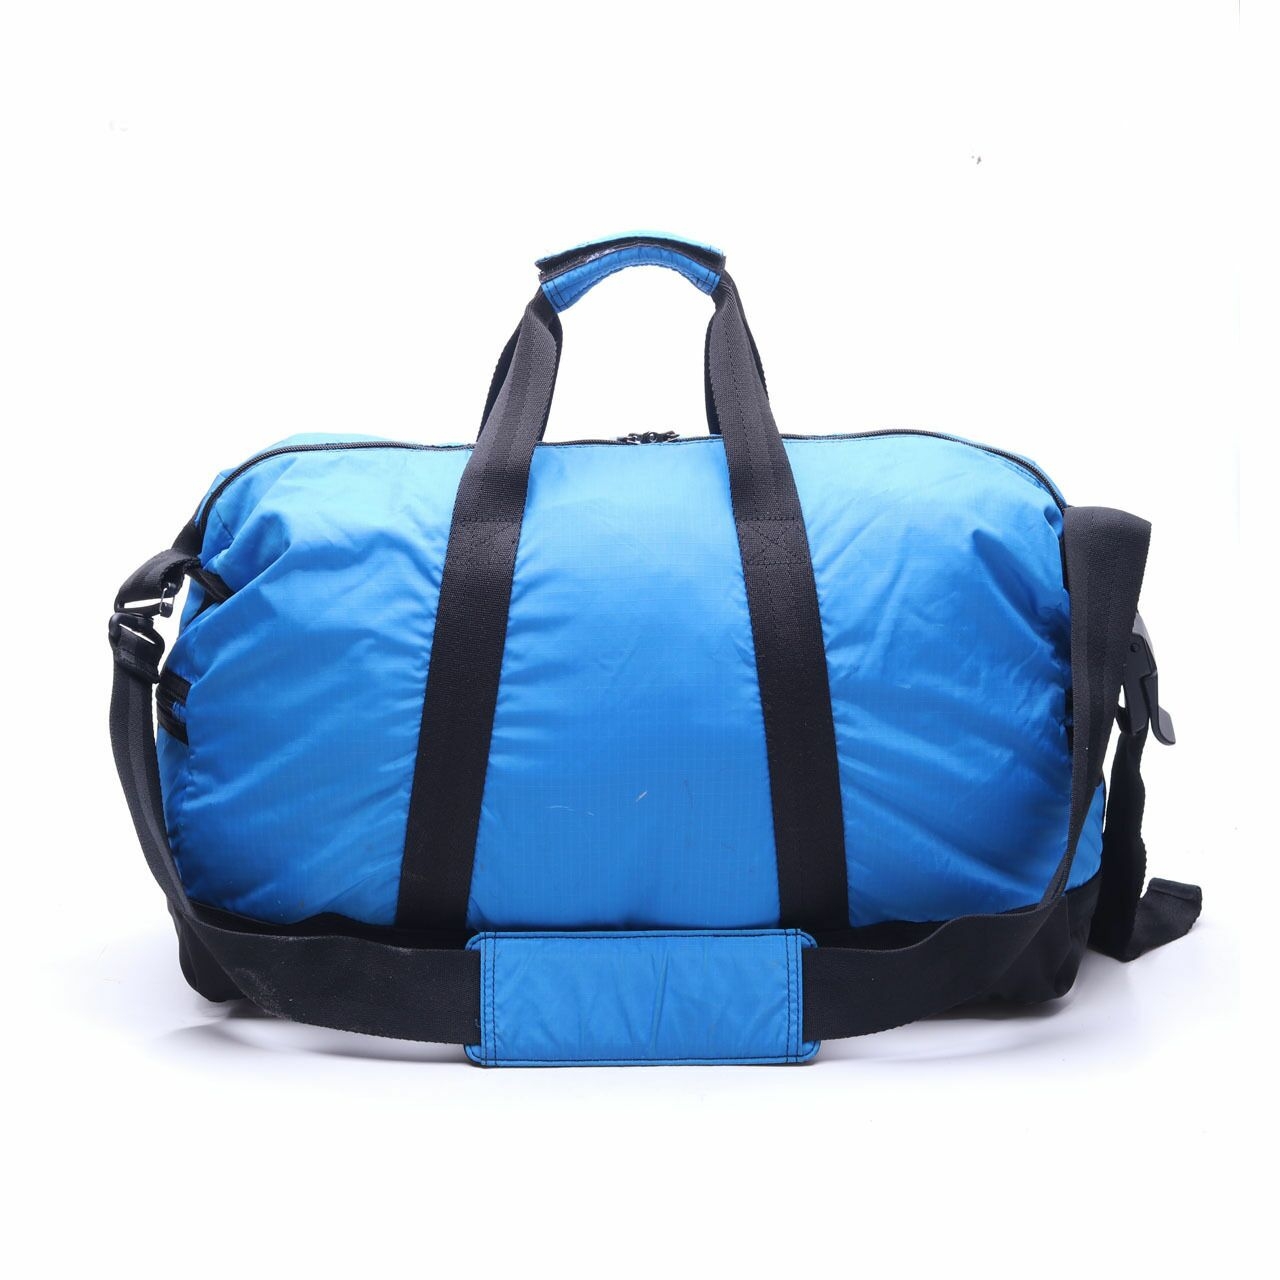 Le Sportsac Blue Luggage and Travel